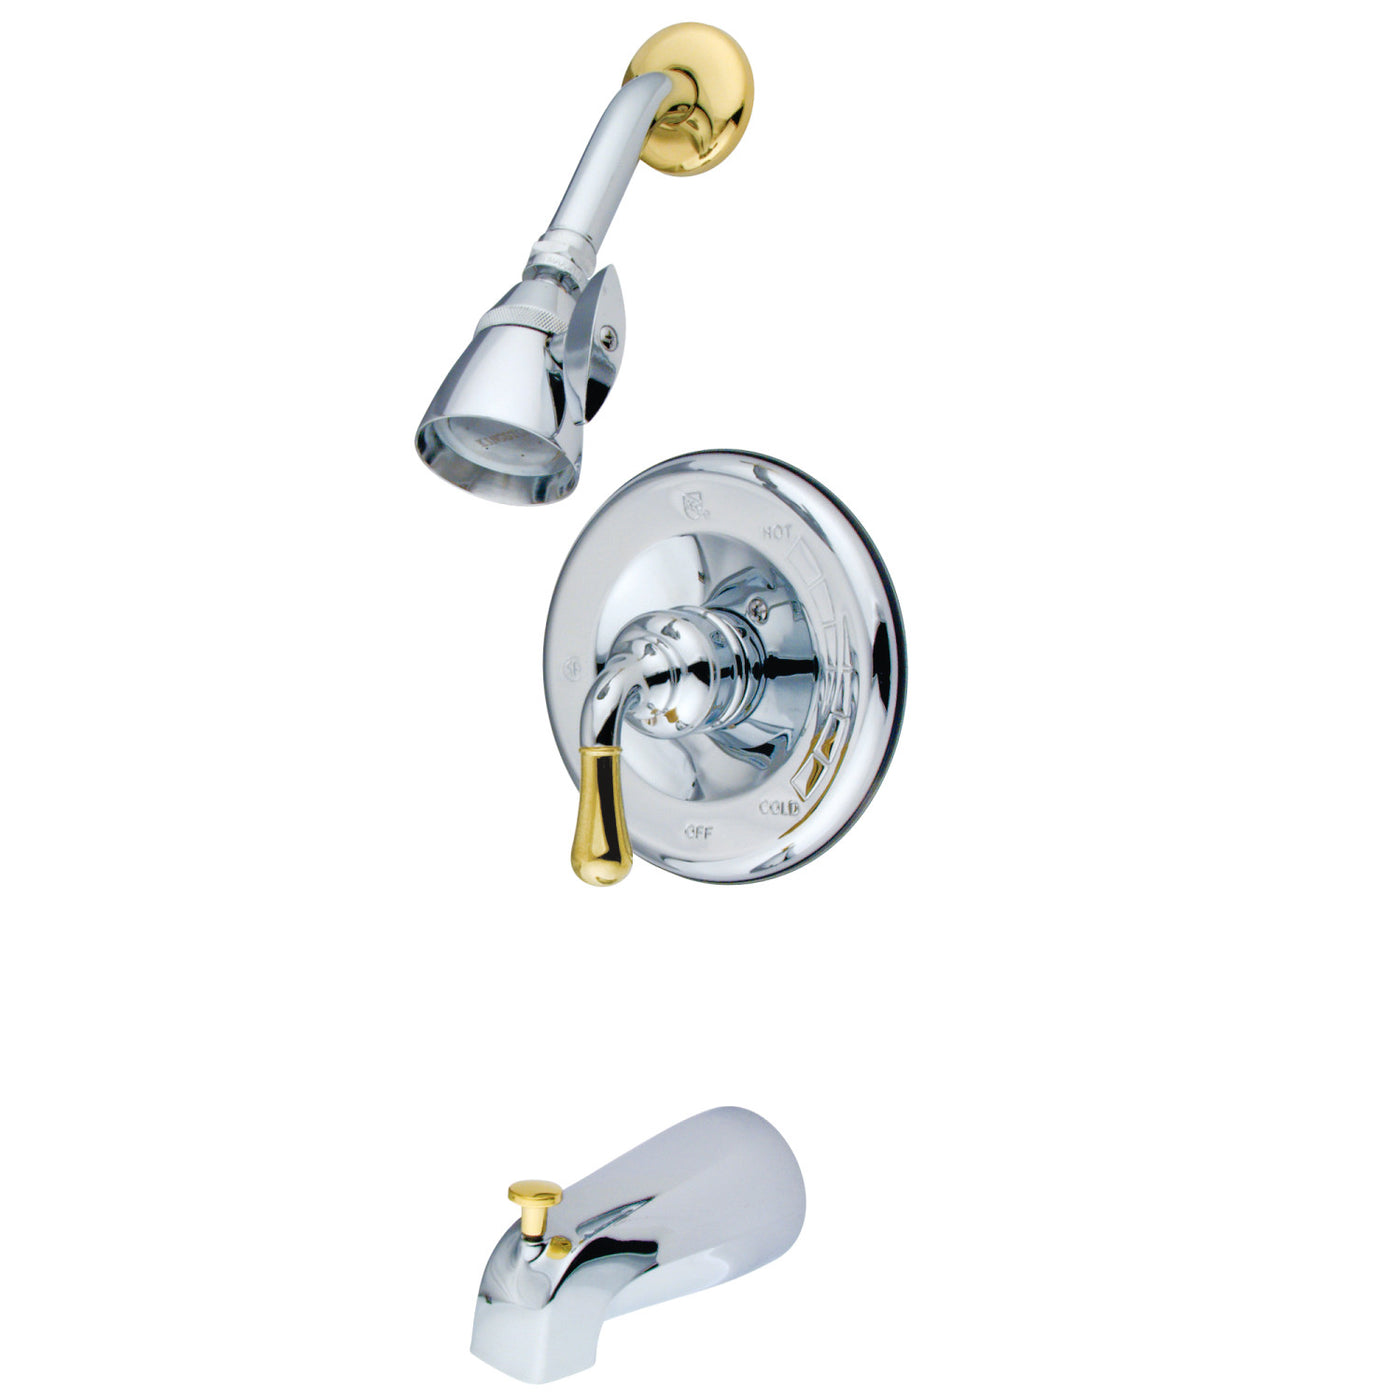 Elements of Design EB1634 Single-Handle Tub and Shower Faucet, Polished Chrome/Polished Brass